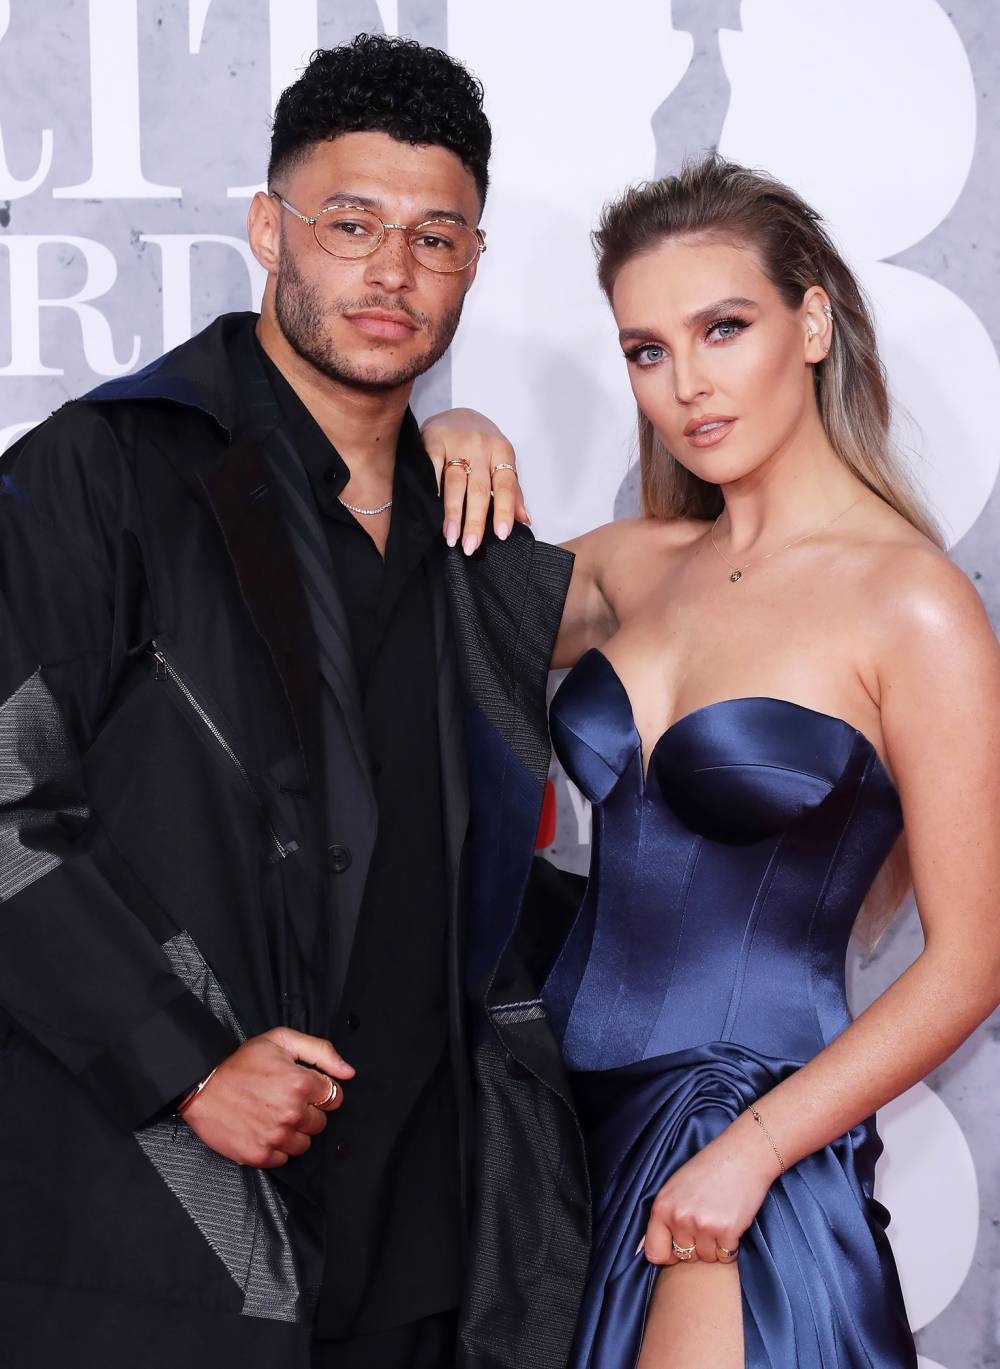 Little Mix's Perrie Edwards Gives Birth, Welcomes 1st Child With Alex Oxlade-Chamberlain